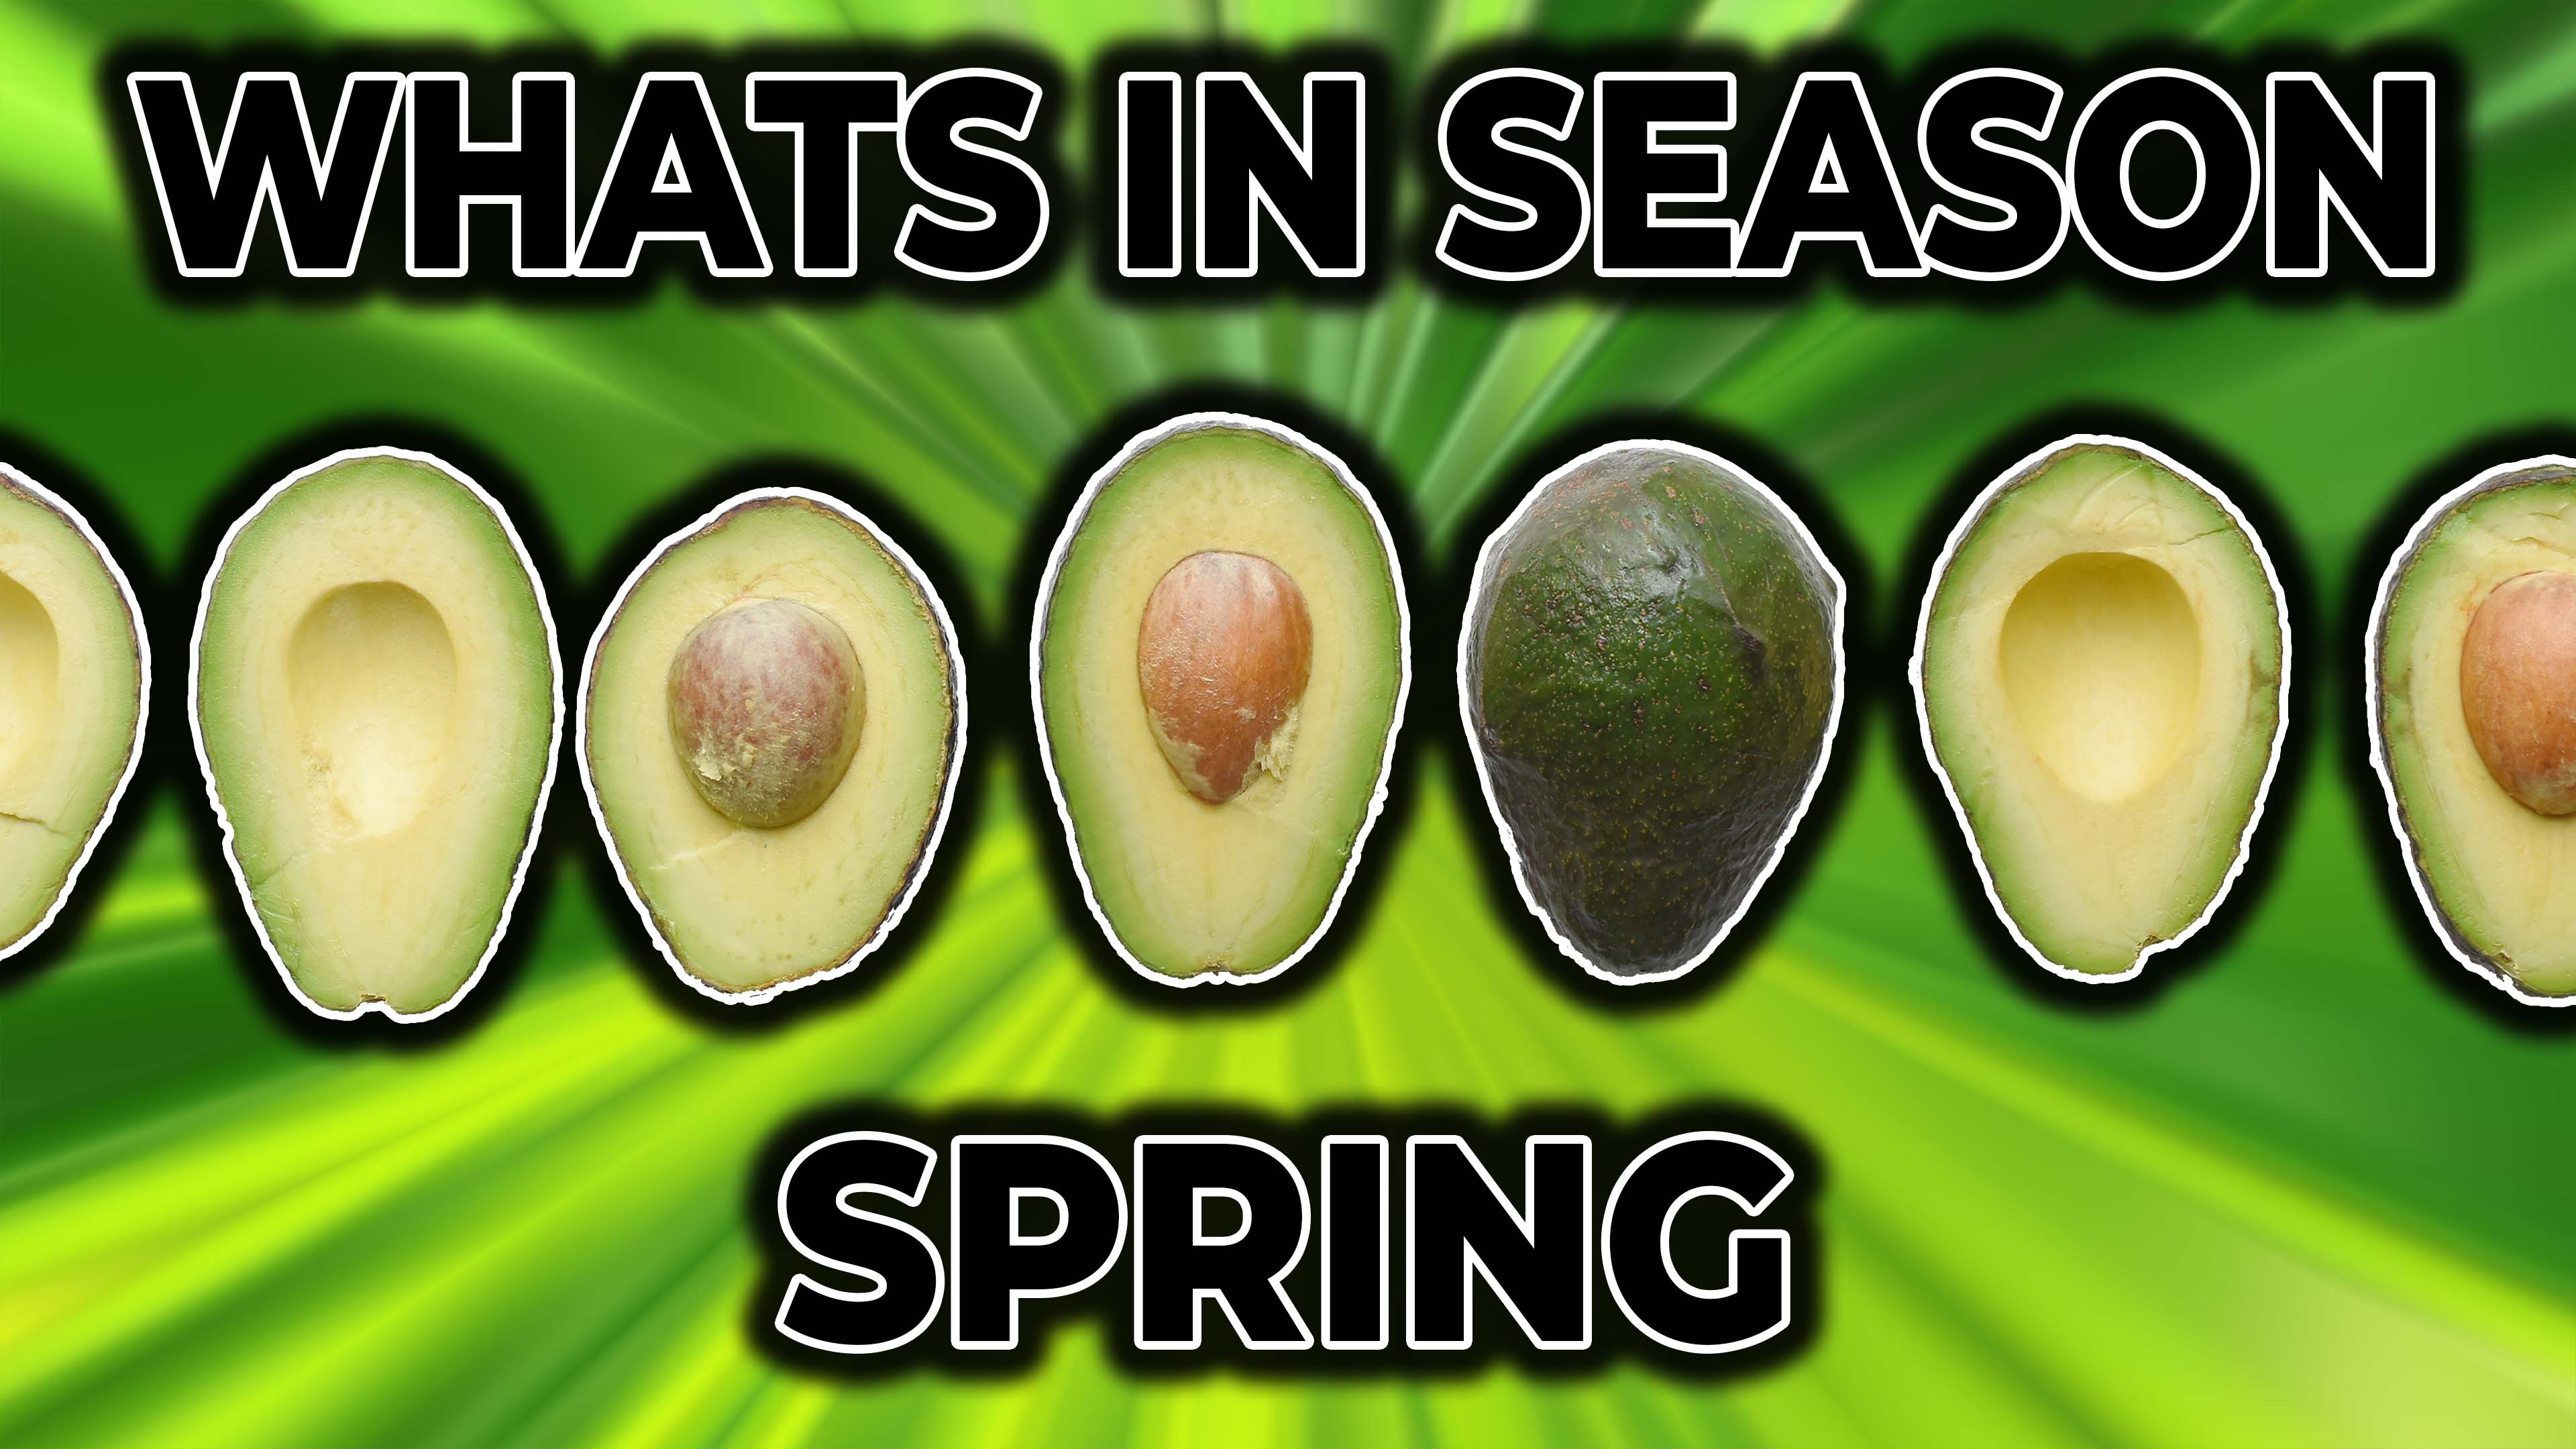 A Guide To Spring Seasonality